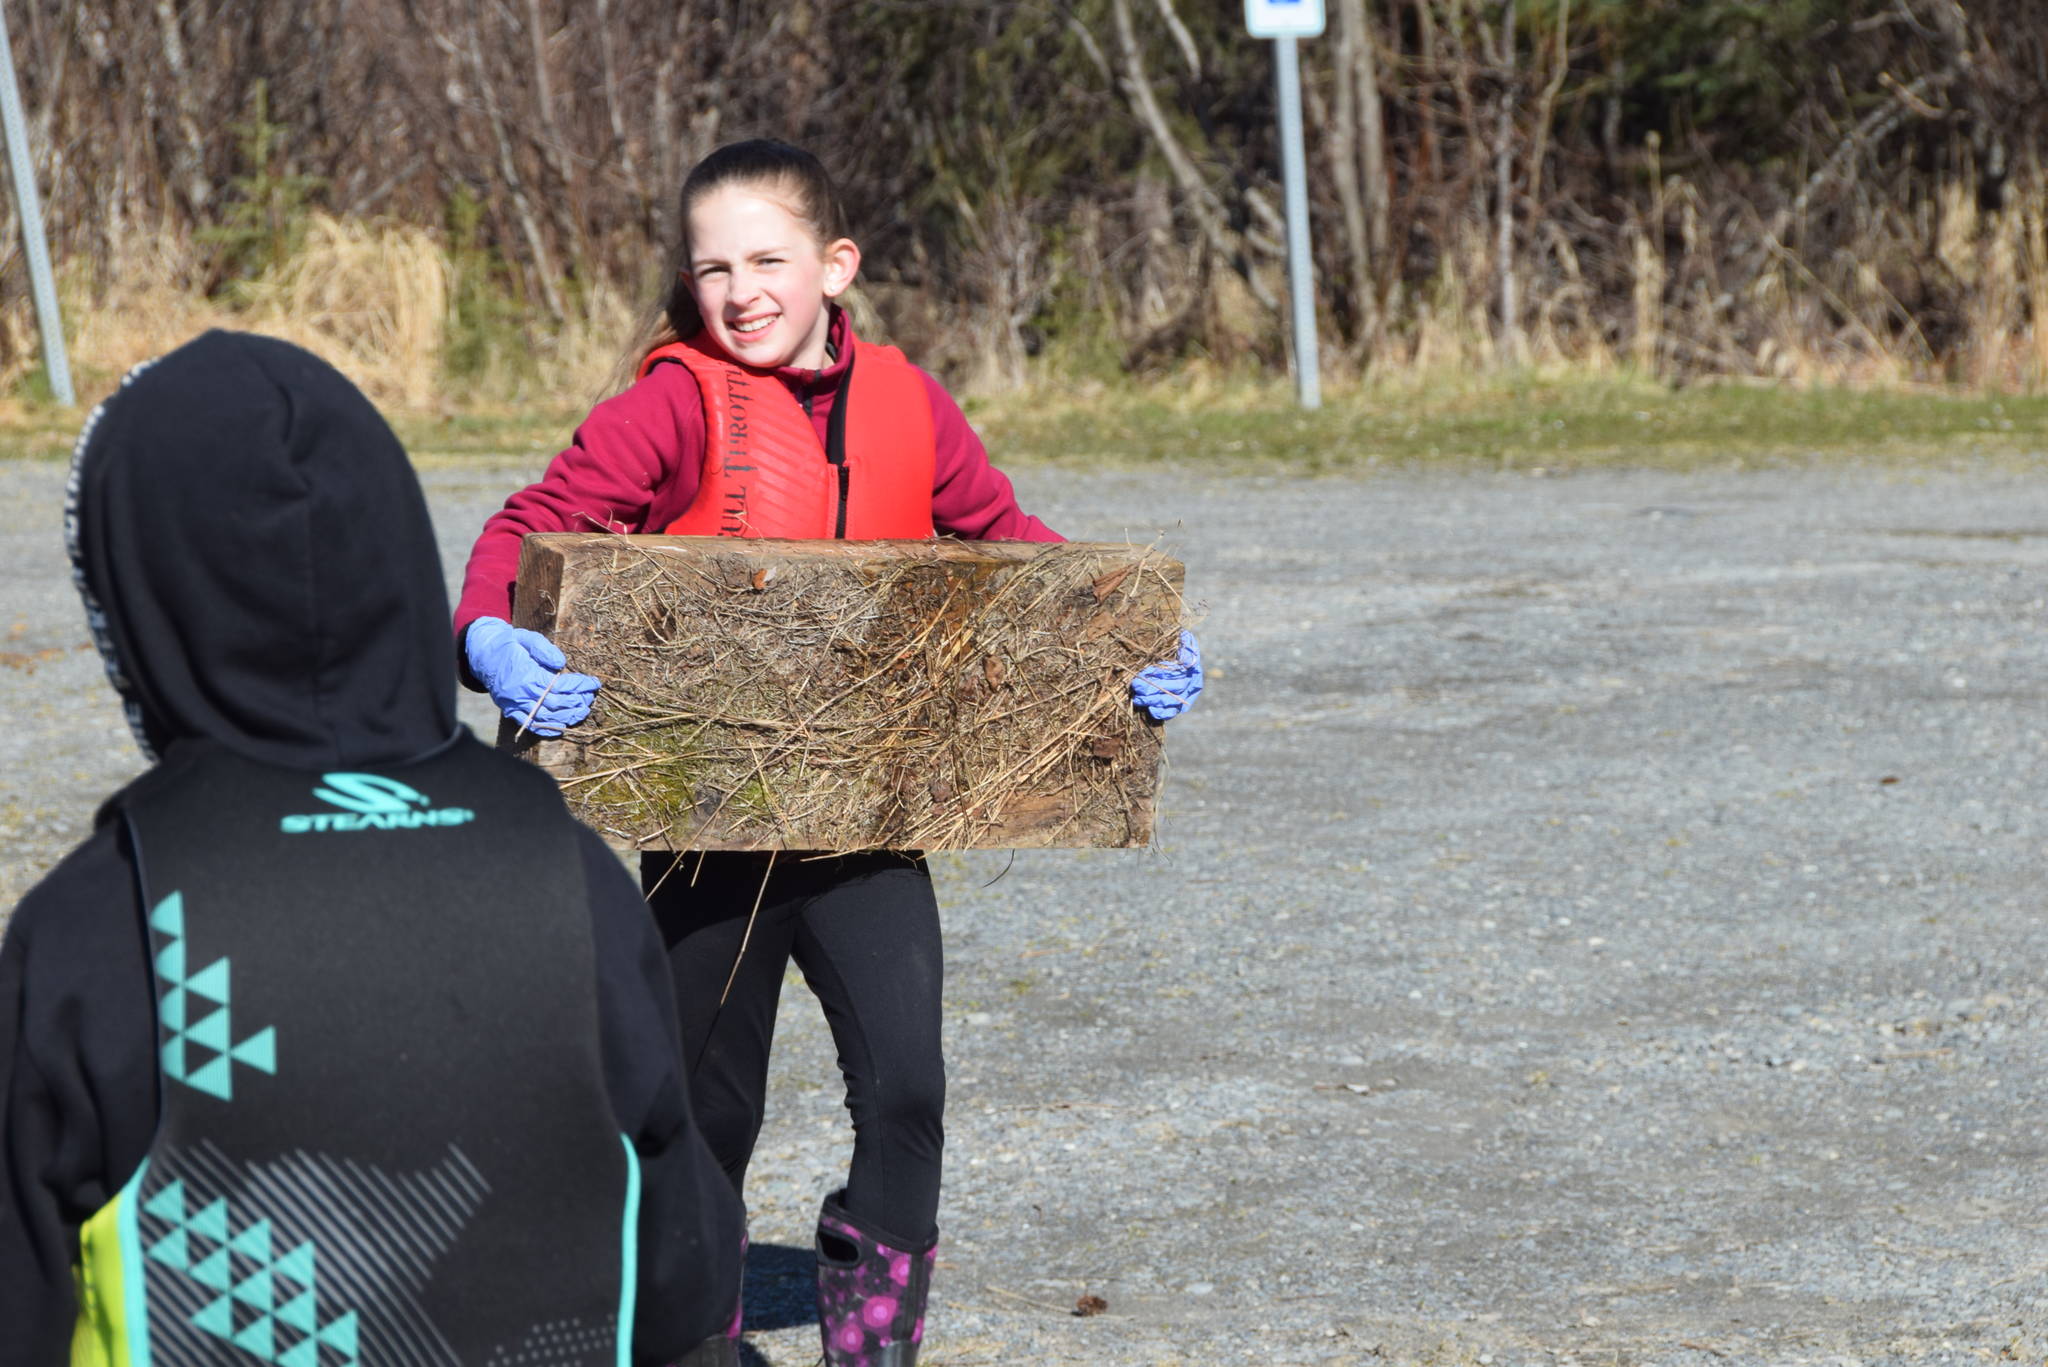 A Redoubt Elementary student carries a piece of wood to the trash pile during the 6th Annual Kids Kenai River Spring Cleanup at Swiftwater Park in Soldotna, Alaska on May 3, 2019. (Photo by Brian Mazurek/Peninsula Clarion)